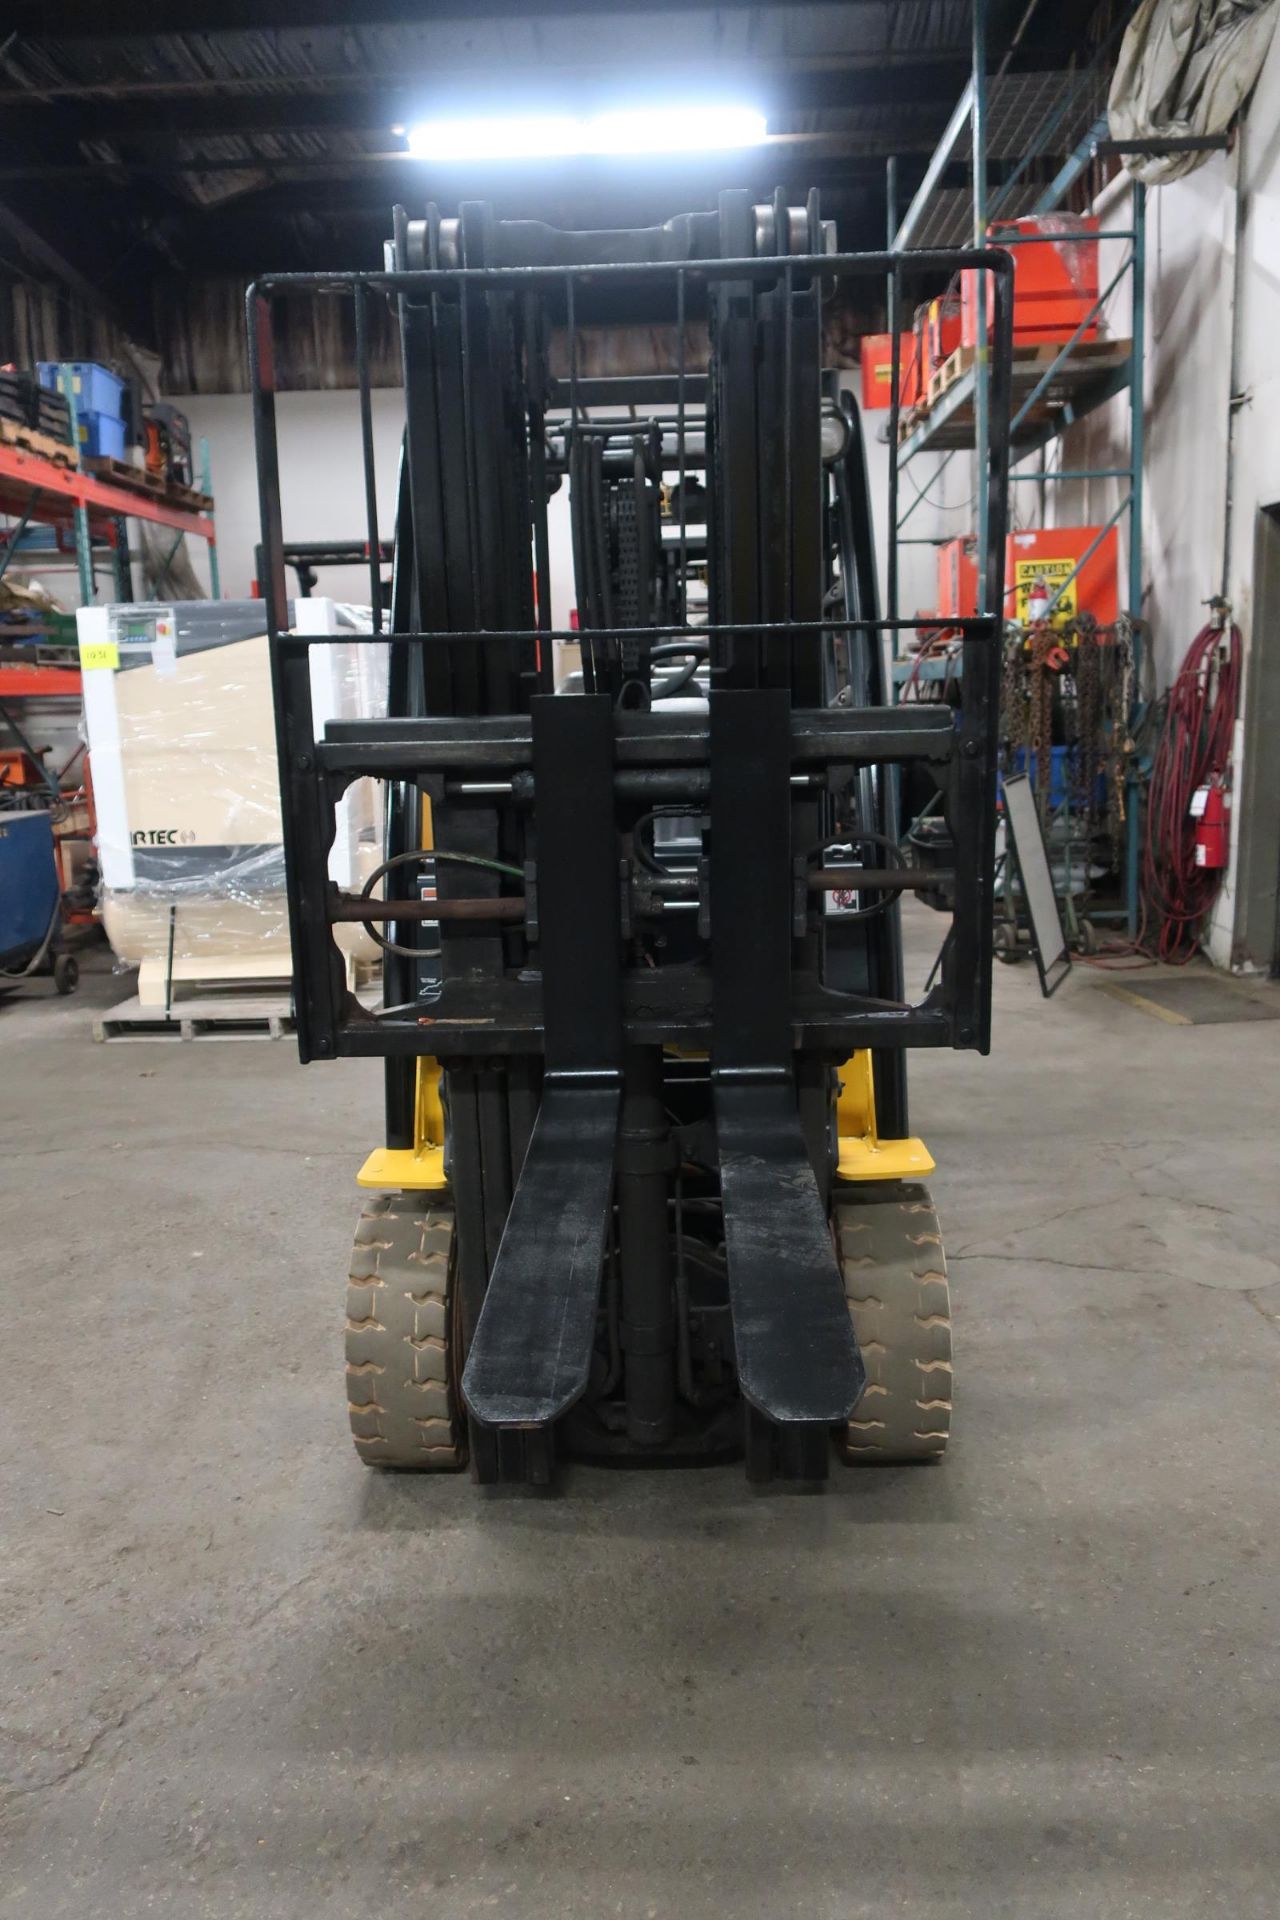 FREE CUSTOMS - 2015 Yale 6000lbs Capacity Forklift with 3-stage mast - LPG (propane) with - Image 2 of 2